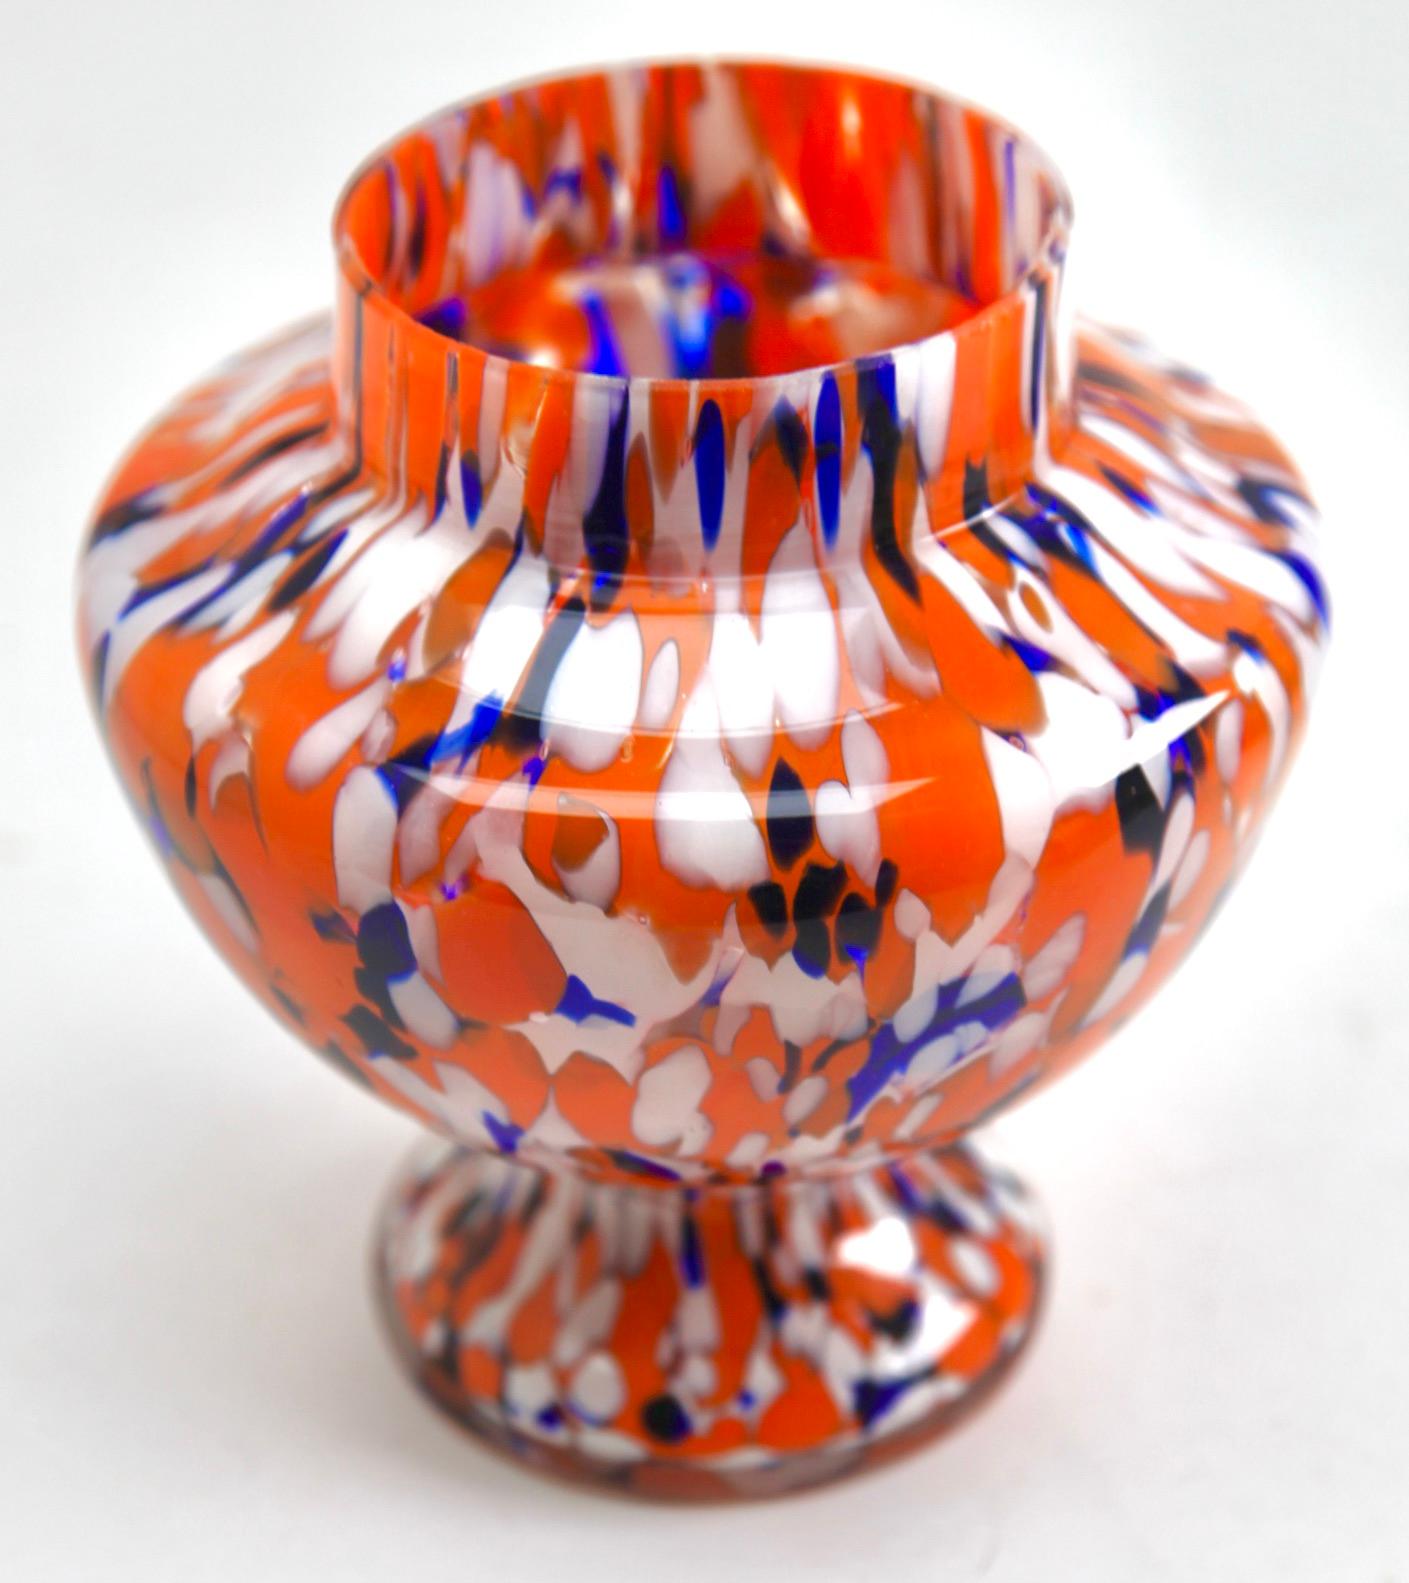 'Pique Fleurs' Vase, in Multi Color Decor with Grille, Late 1930s In Good Condition For Sale In Verviers, BE